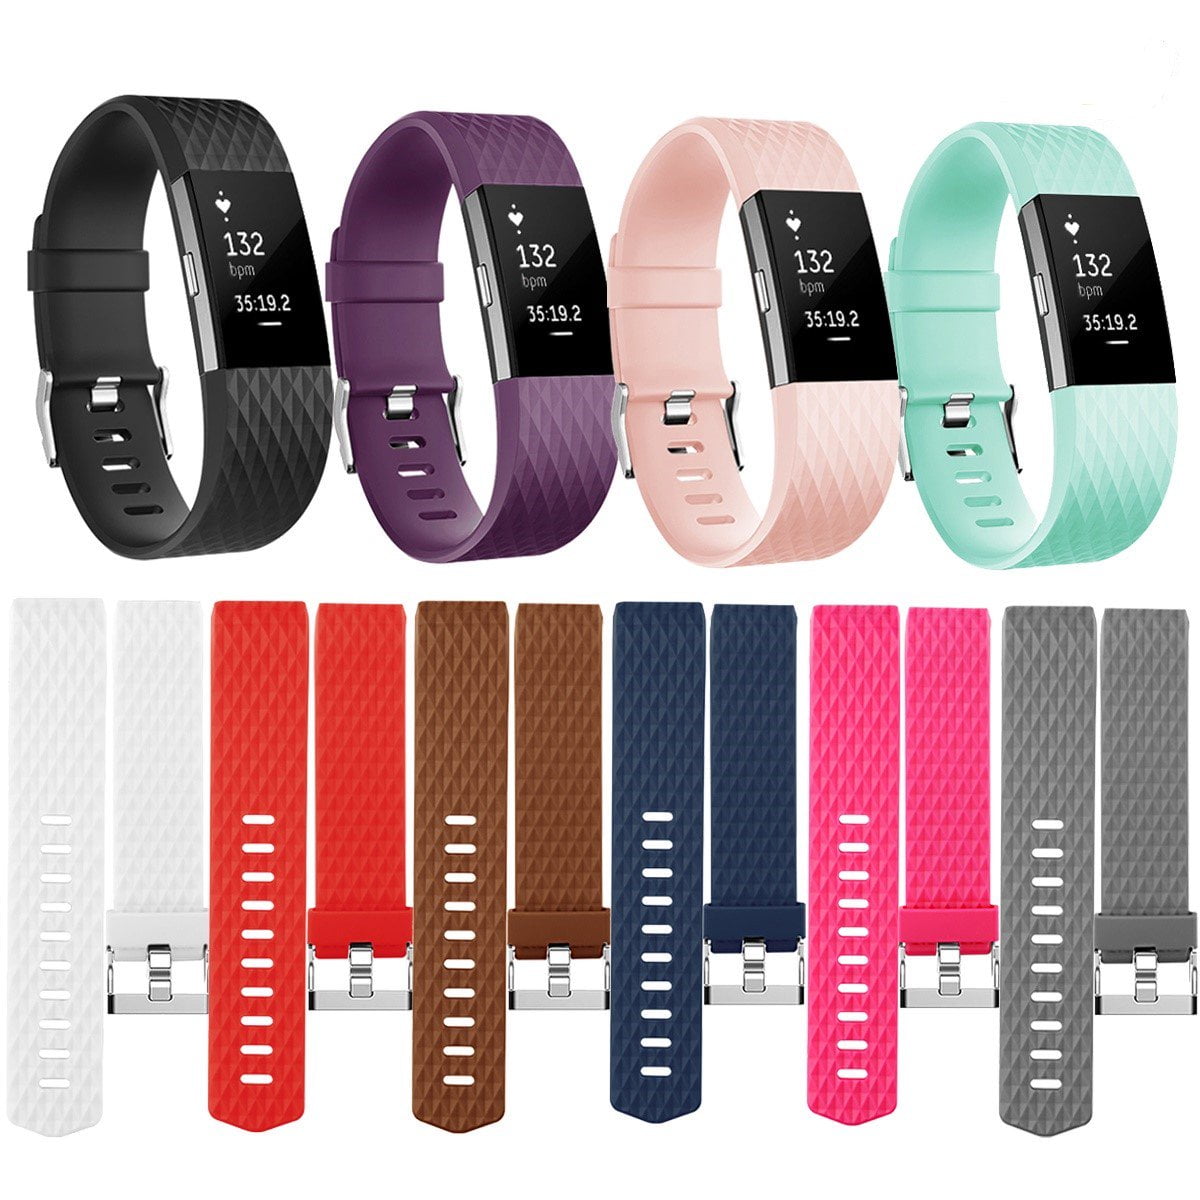 3 Pack Replacement Wristband For Fitbit Charge 2 Band Silicone Fitness Large USA 